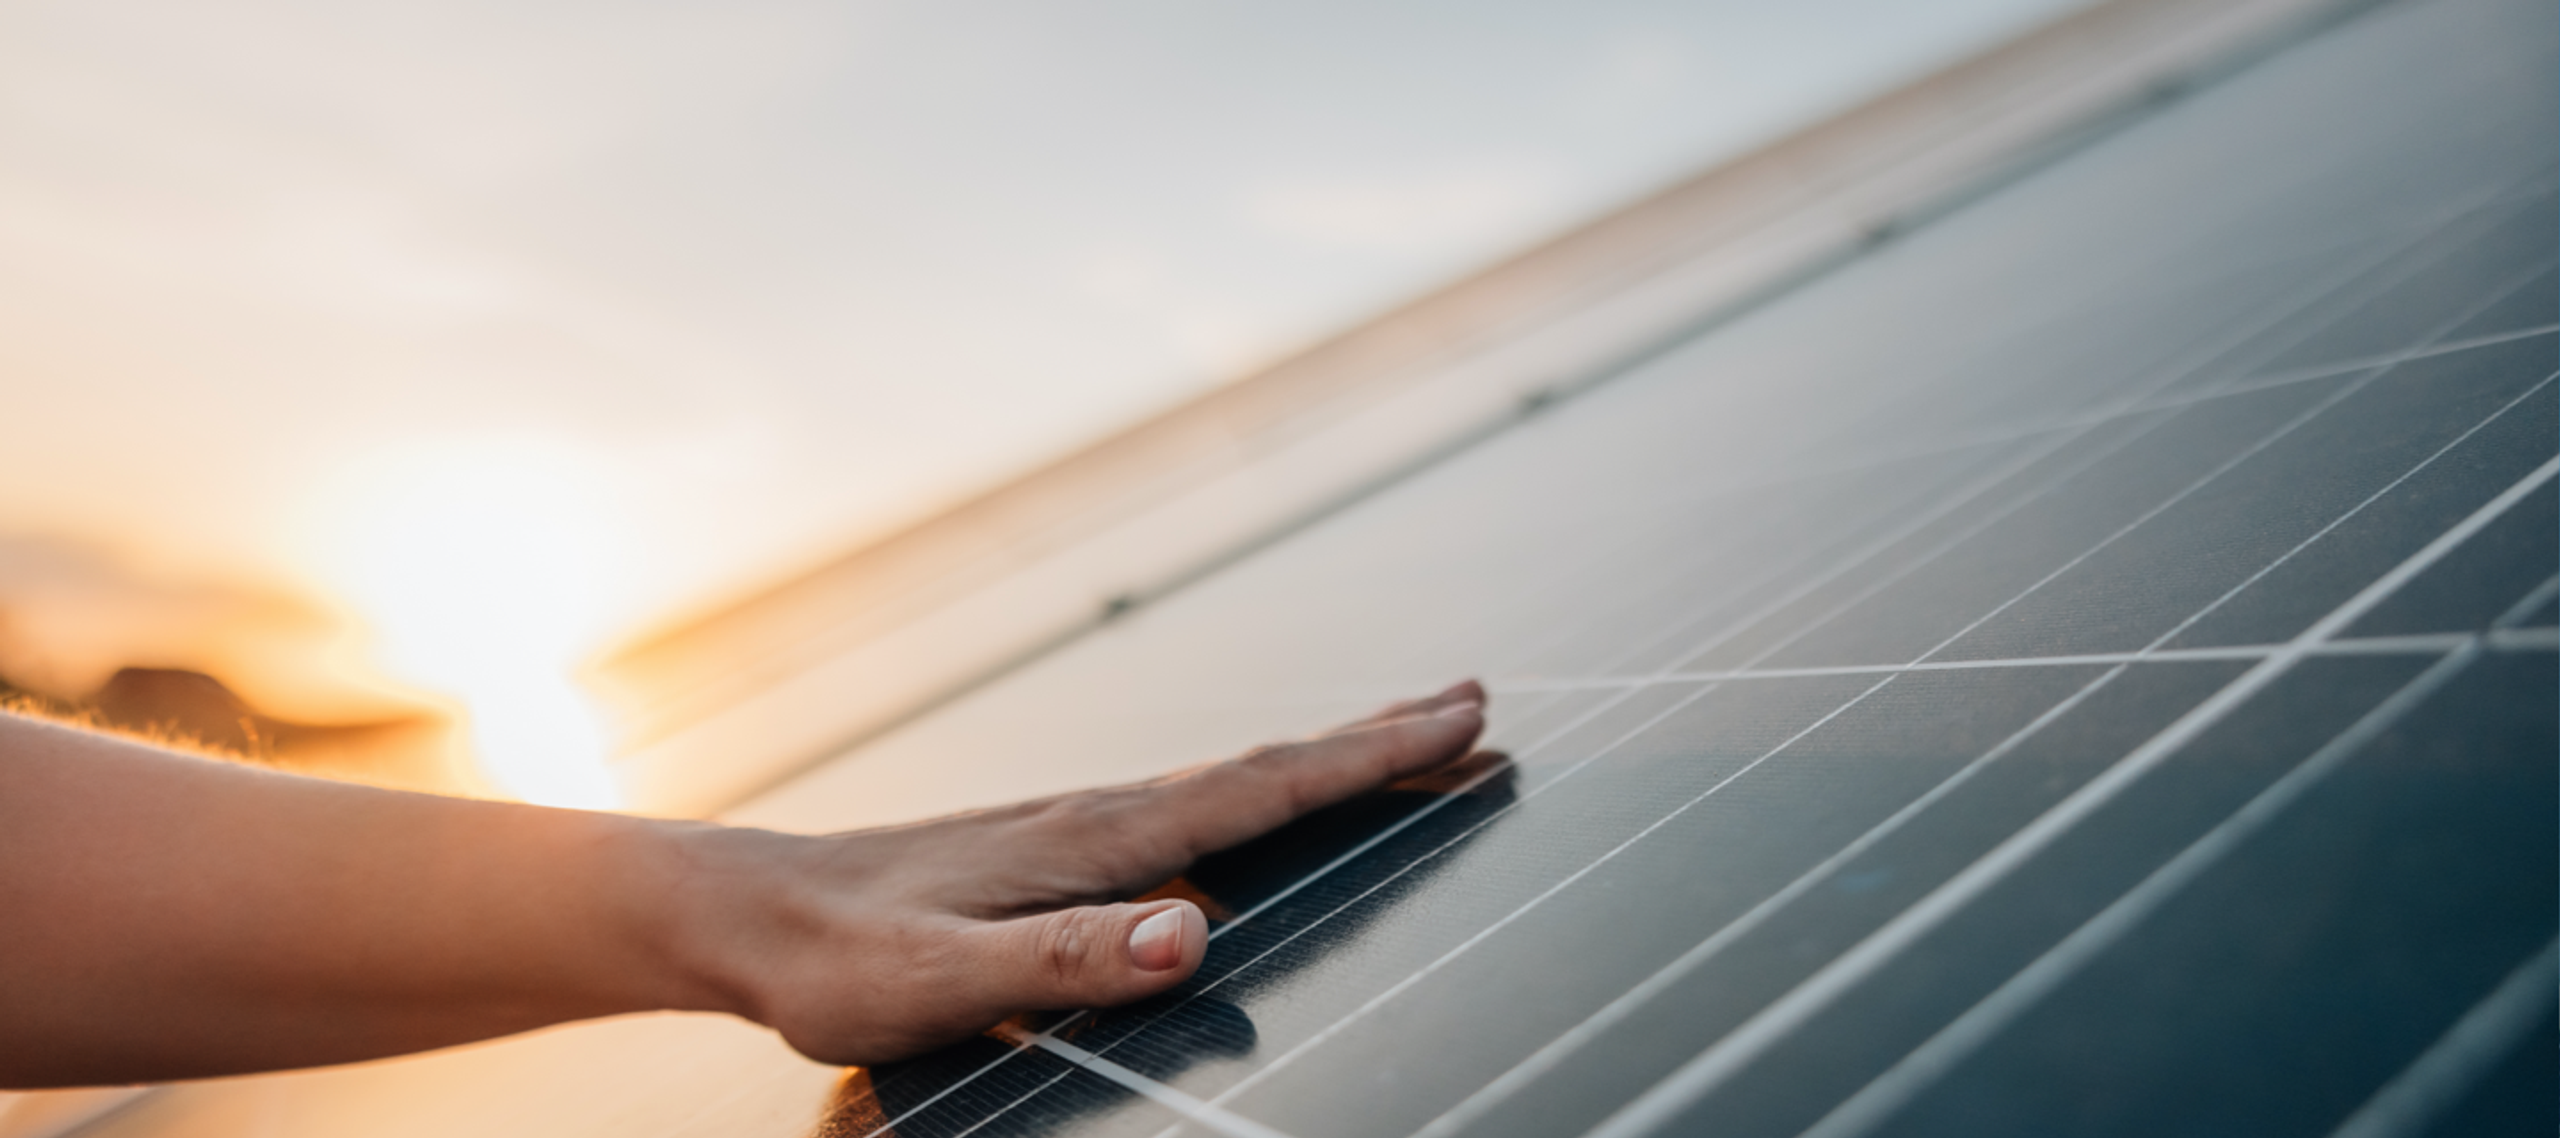 Hand touching a solar panel